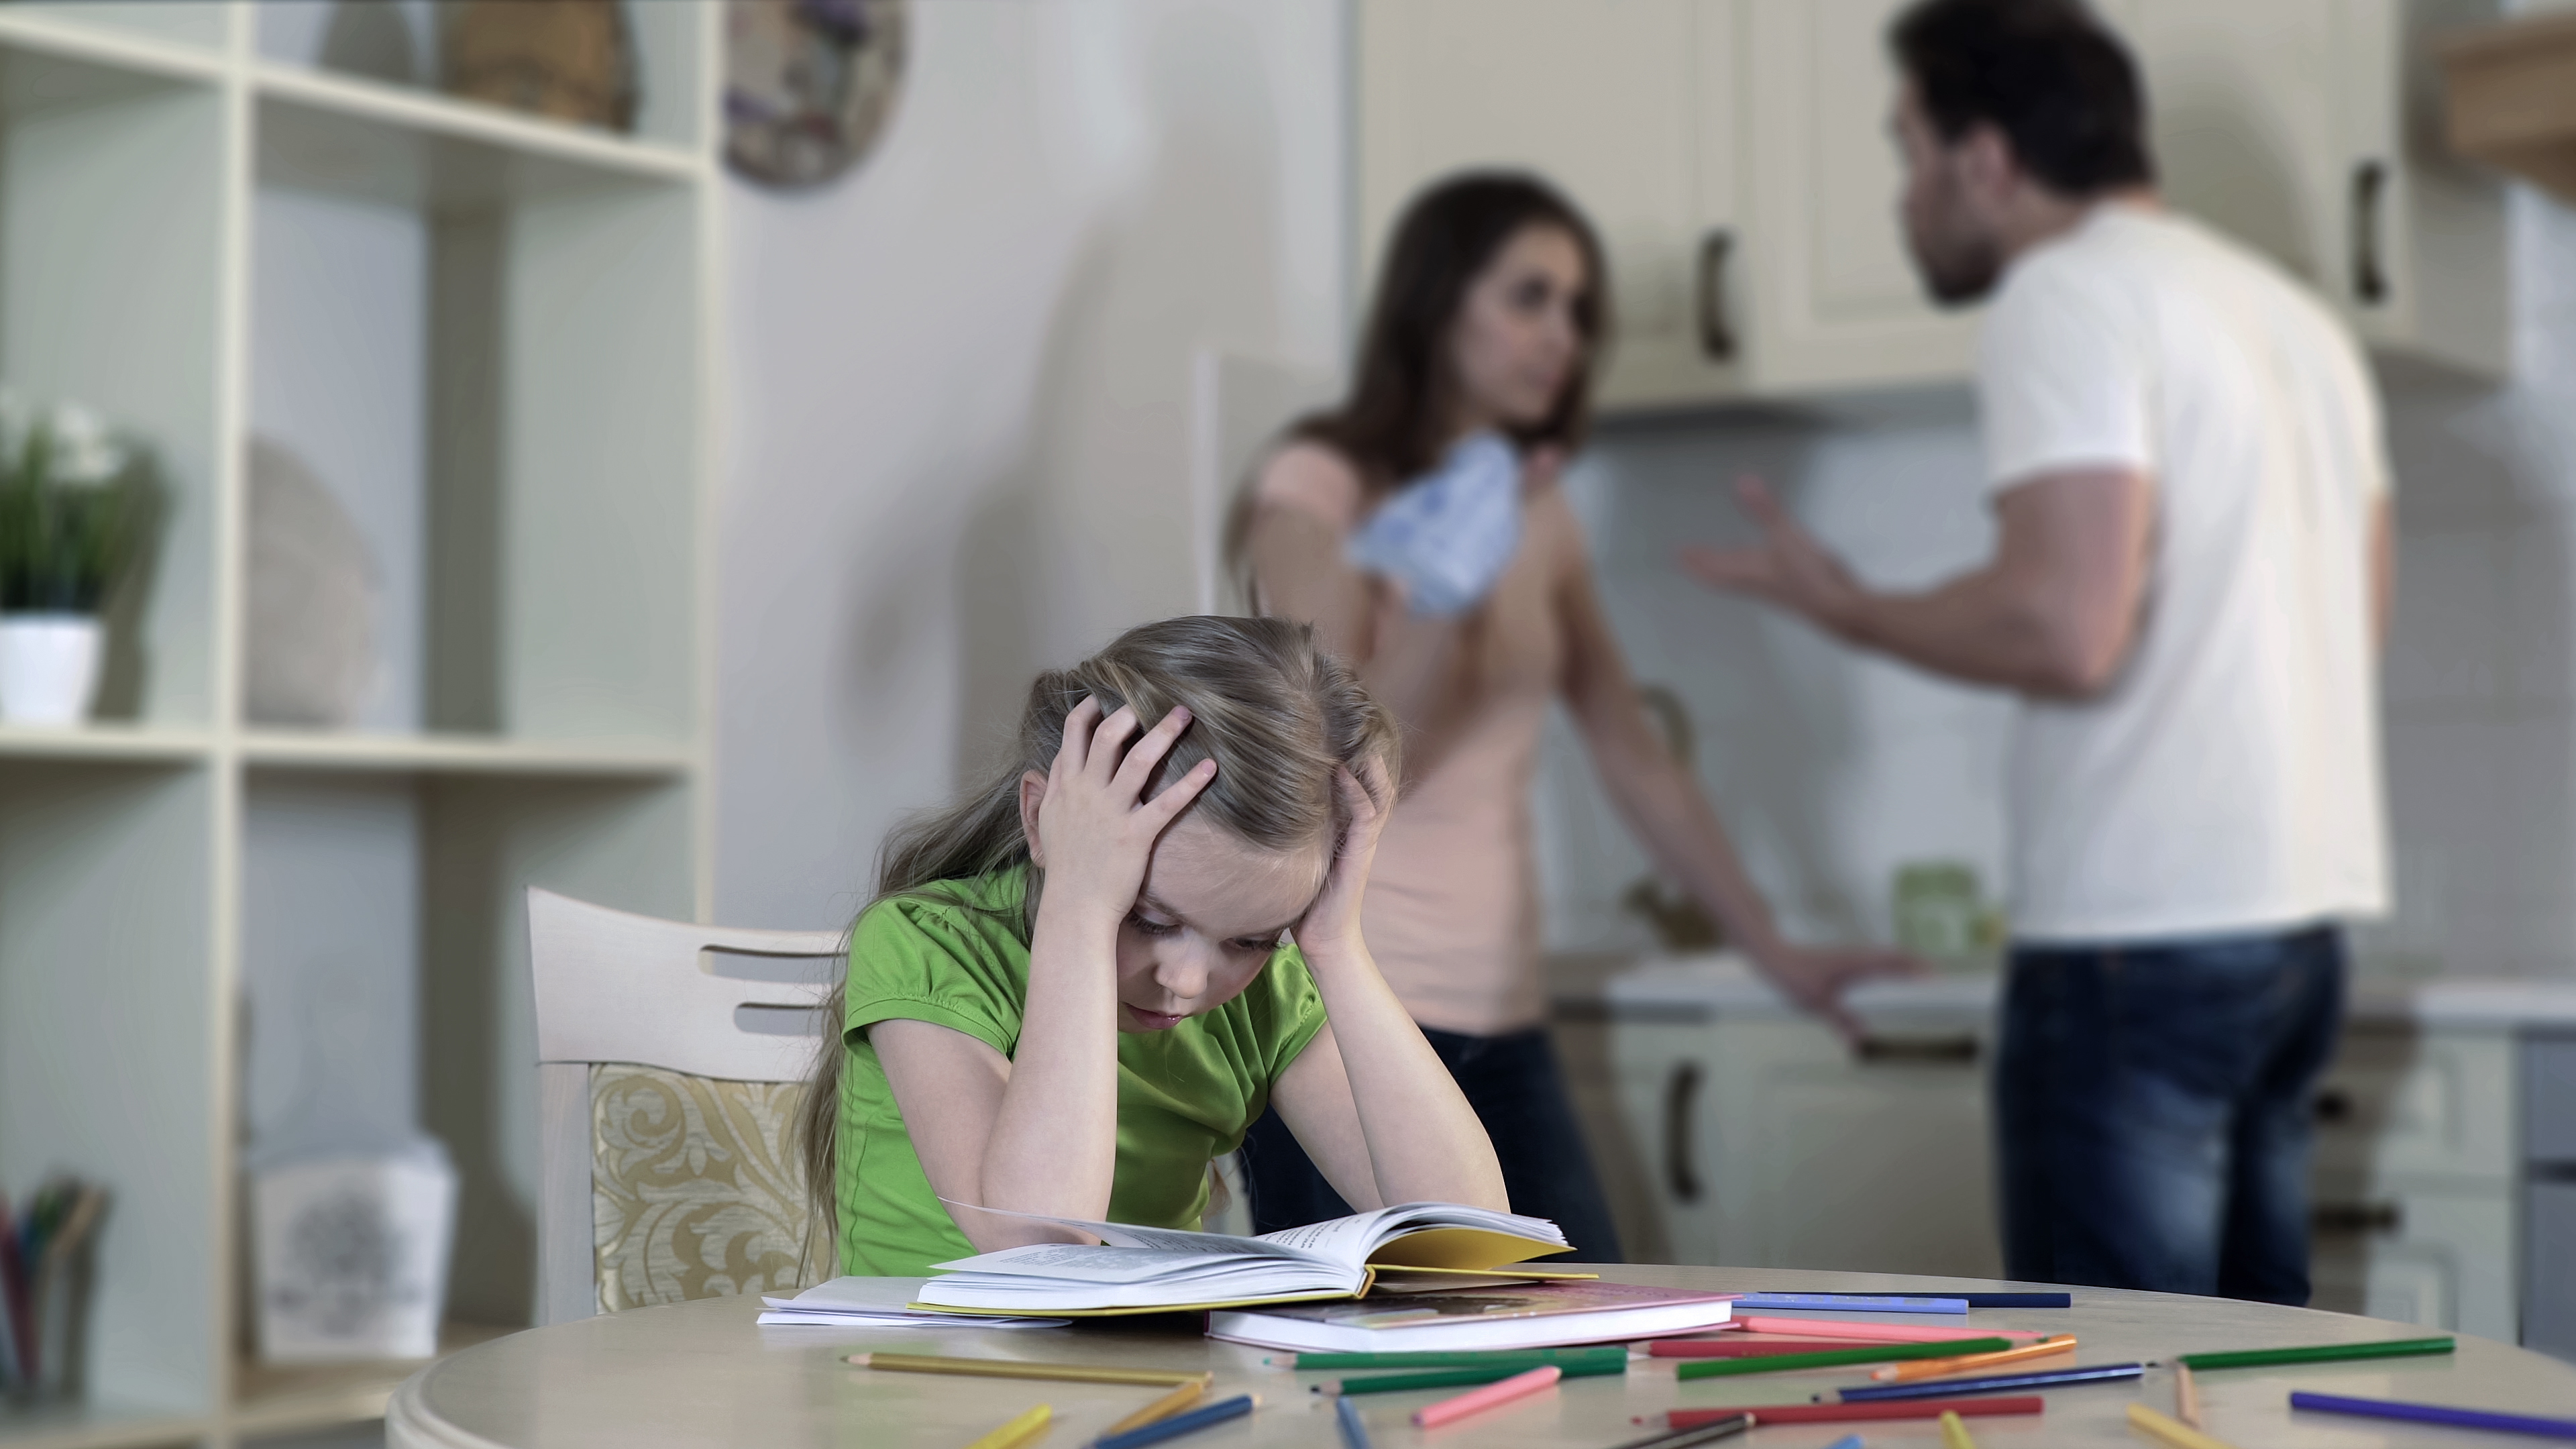 Child looks stressed studying while adults argue in the background, depicting family tension affecting children&#x27;s well-being